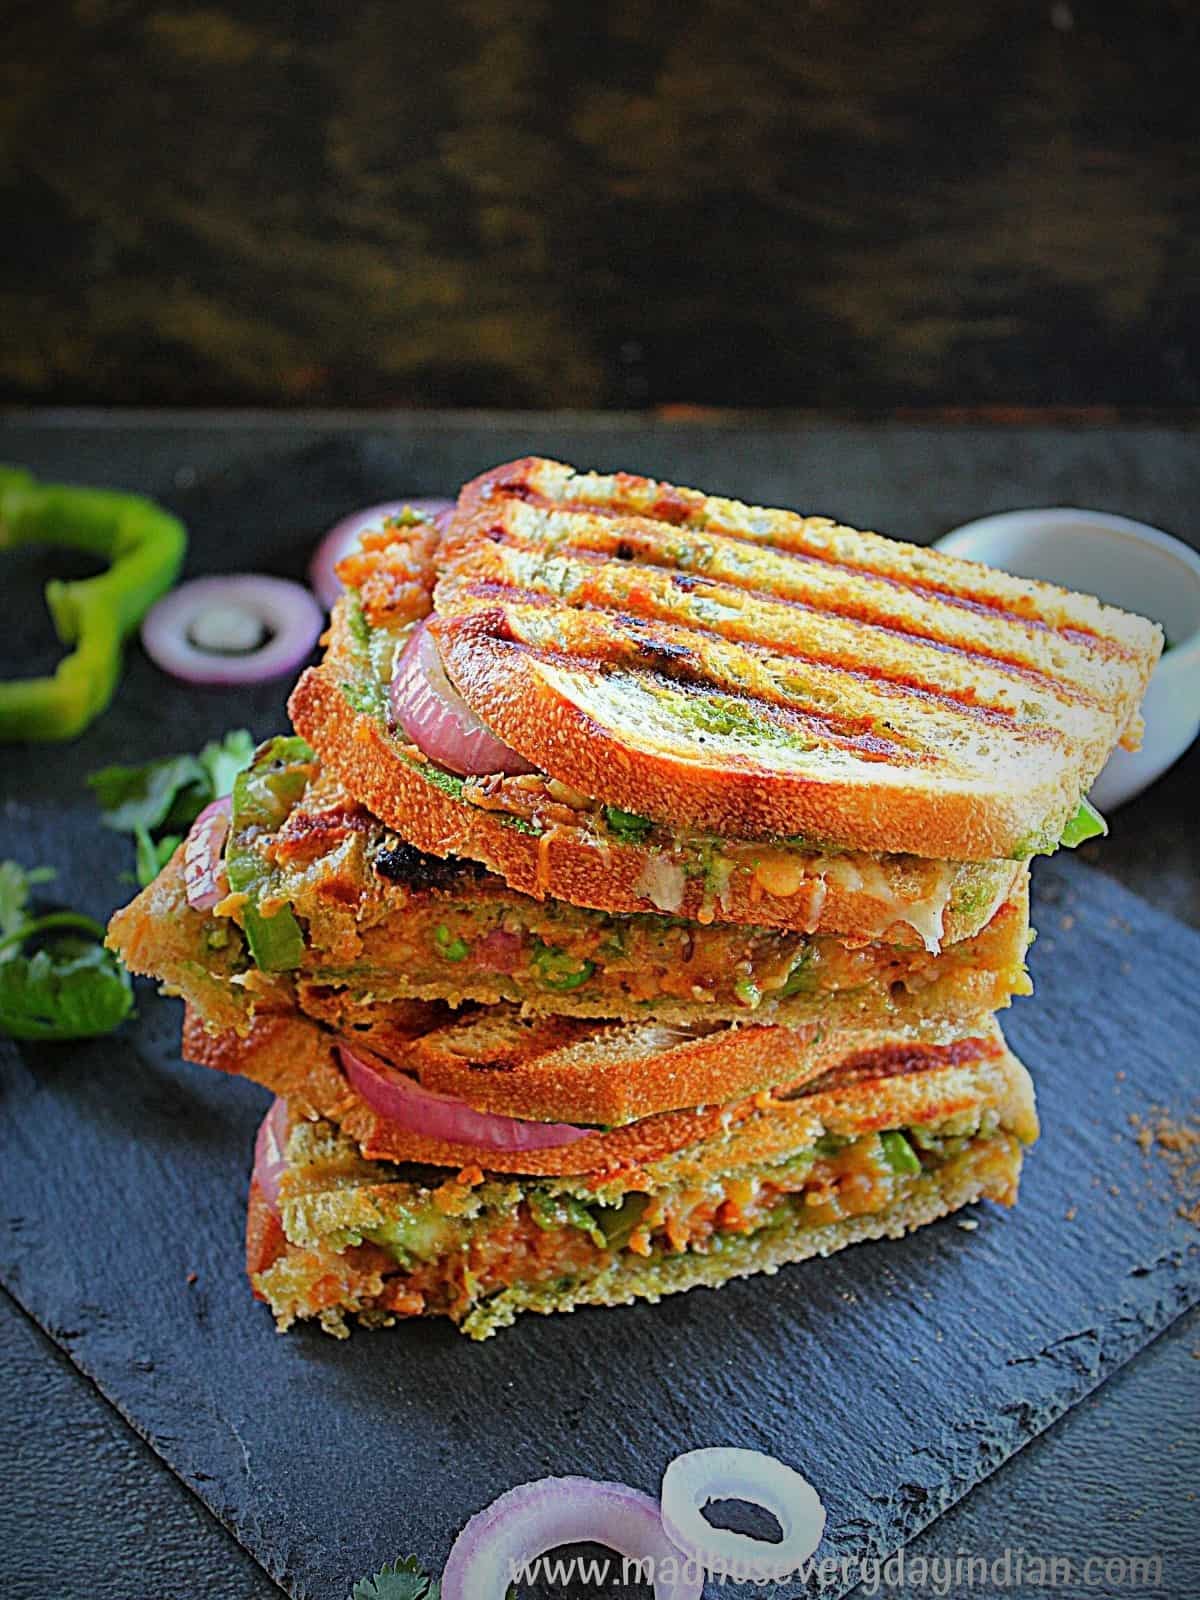 Samosa Grilled Cheese Sandwich - Madhu's Everyday Indian